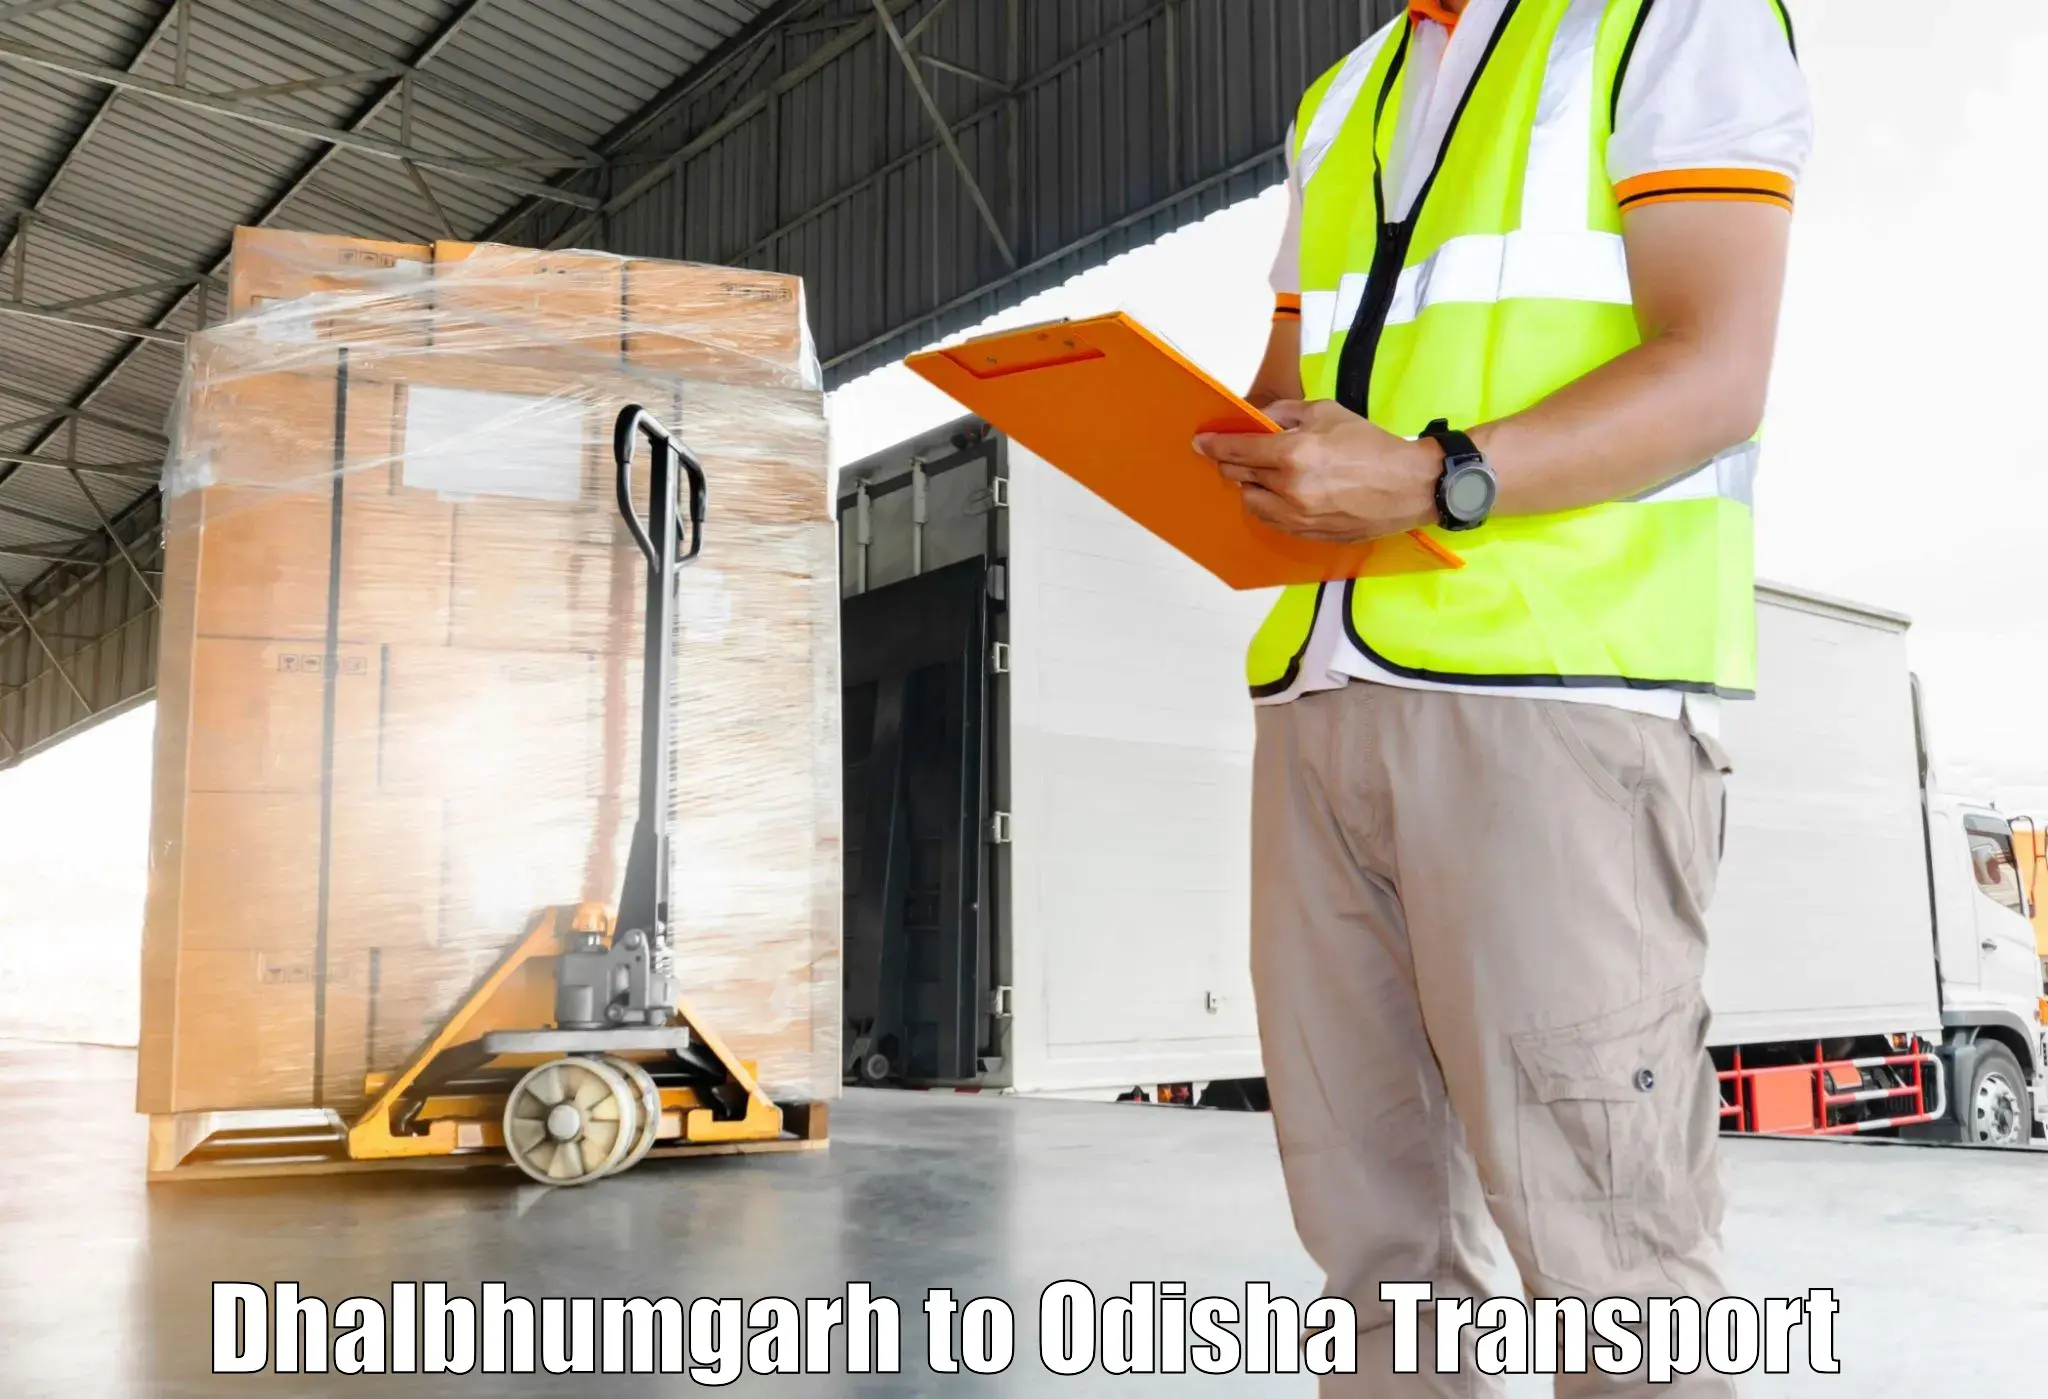 Container transportation services Dhalbhumgarh to Cuttack